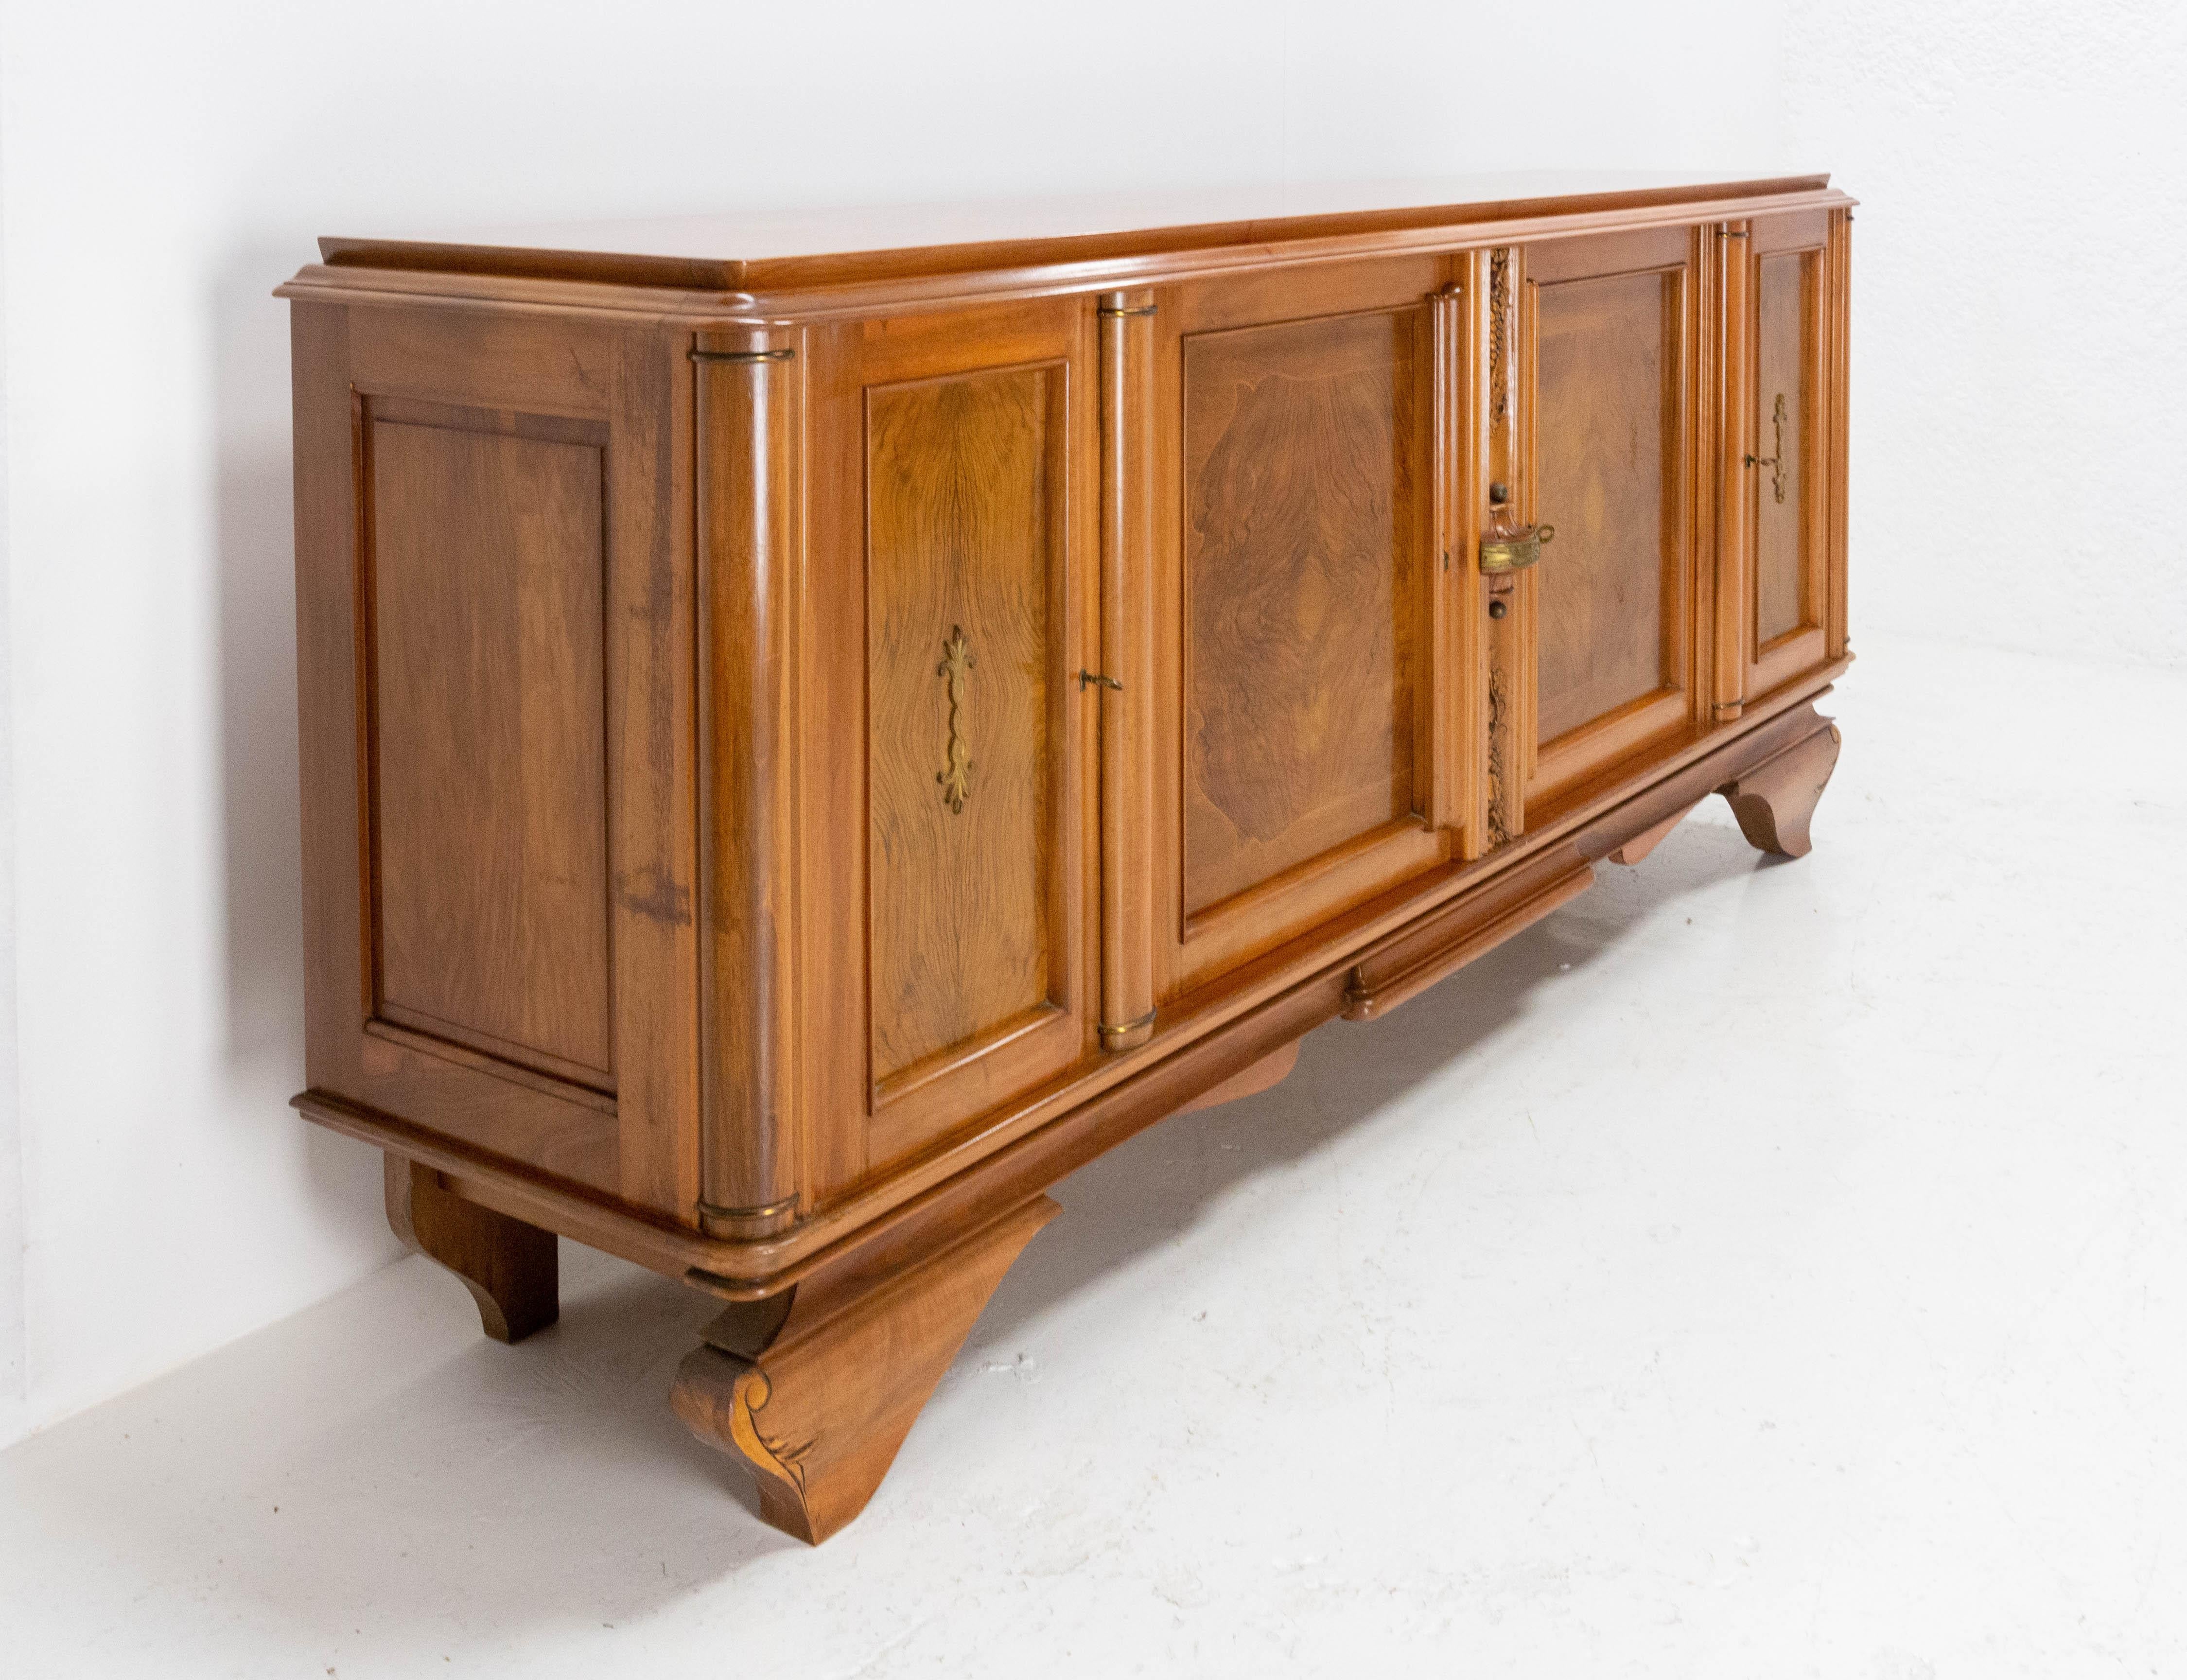 Midcentury credenza sideboard French buffet circa 1960
Four doors and two inside drawers
Solid walnut
In good condition 

Shipping:
wooden case 234,00 69,00 62,00 cm 165  kg.